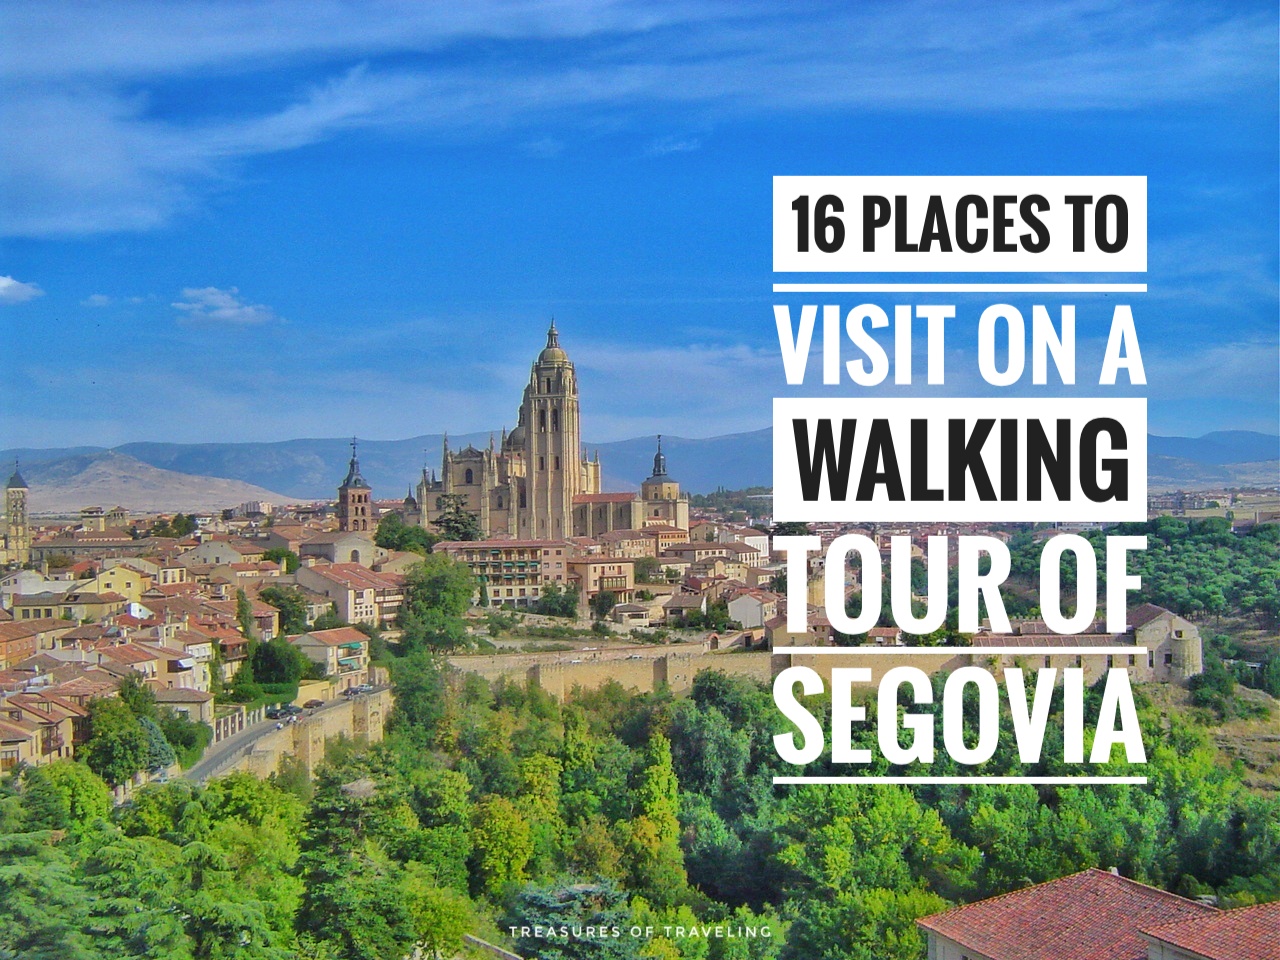 Segovia is a wonderful Spanish city to visit full of culture, history and treasures of traveling! From the Roman Aqueduct to the Alcázar de Segovia; everything in Segovia is within walking distance. Here are 16 places to visit on a walking tour of Segovia!